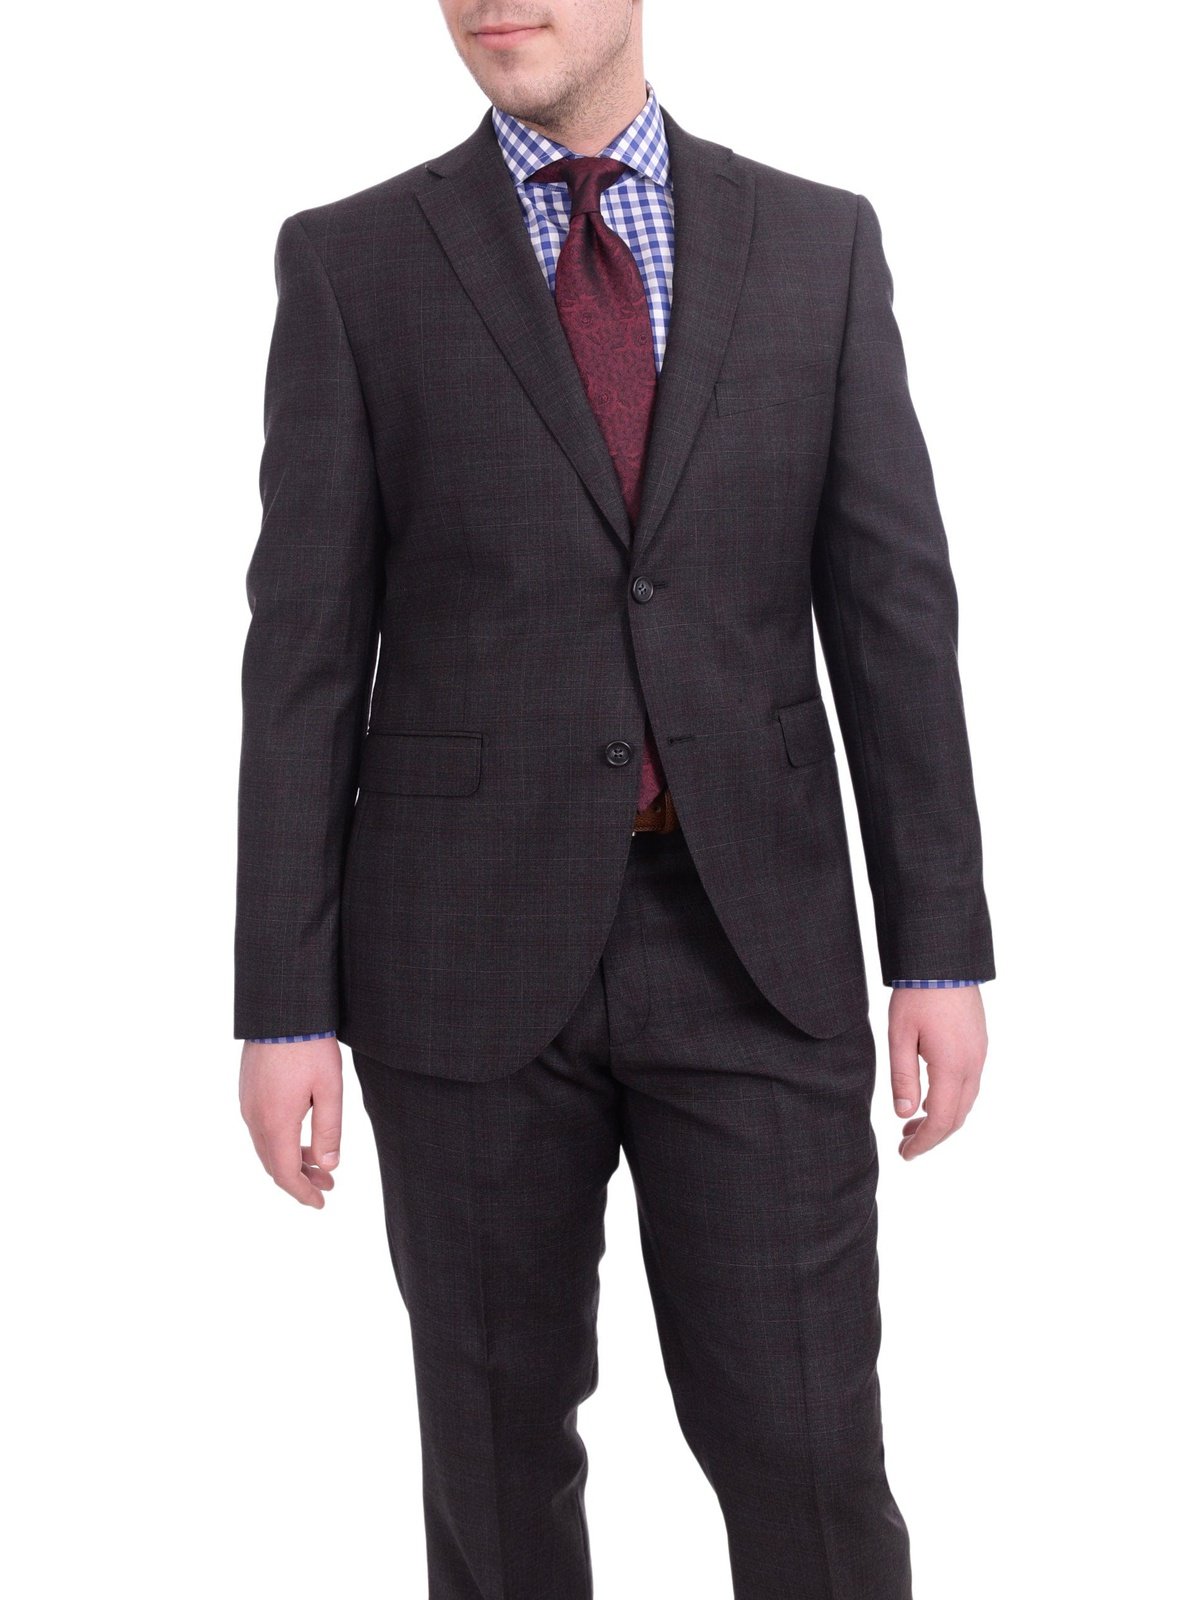 Zanetti TWO PIECE SUITS Zanetti Extra Slim Fit Charcoal Gray Plaid Two Button Wool Suit